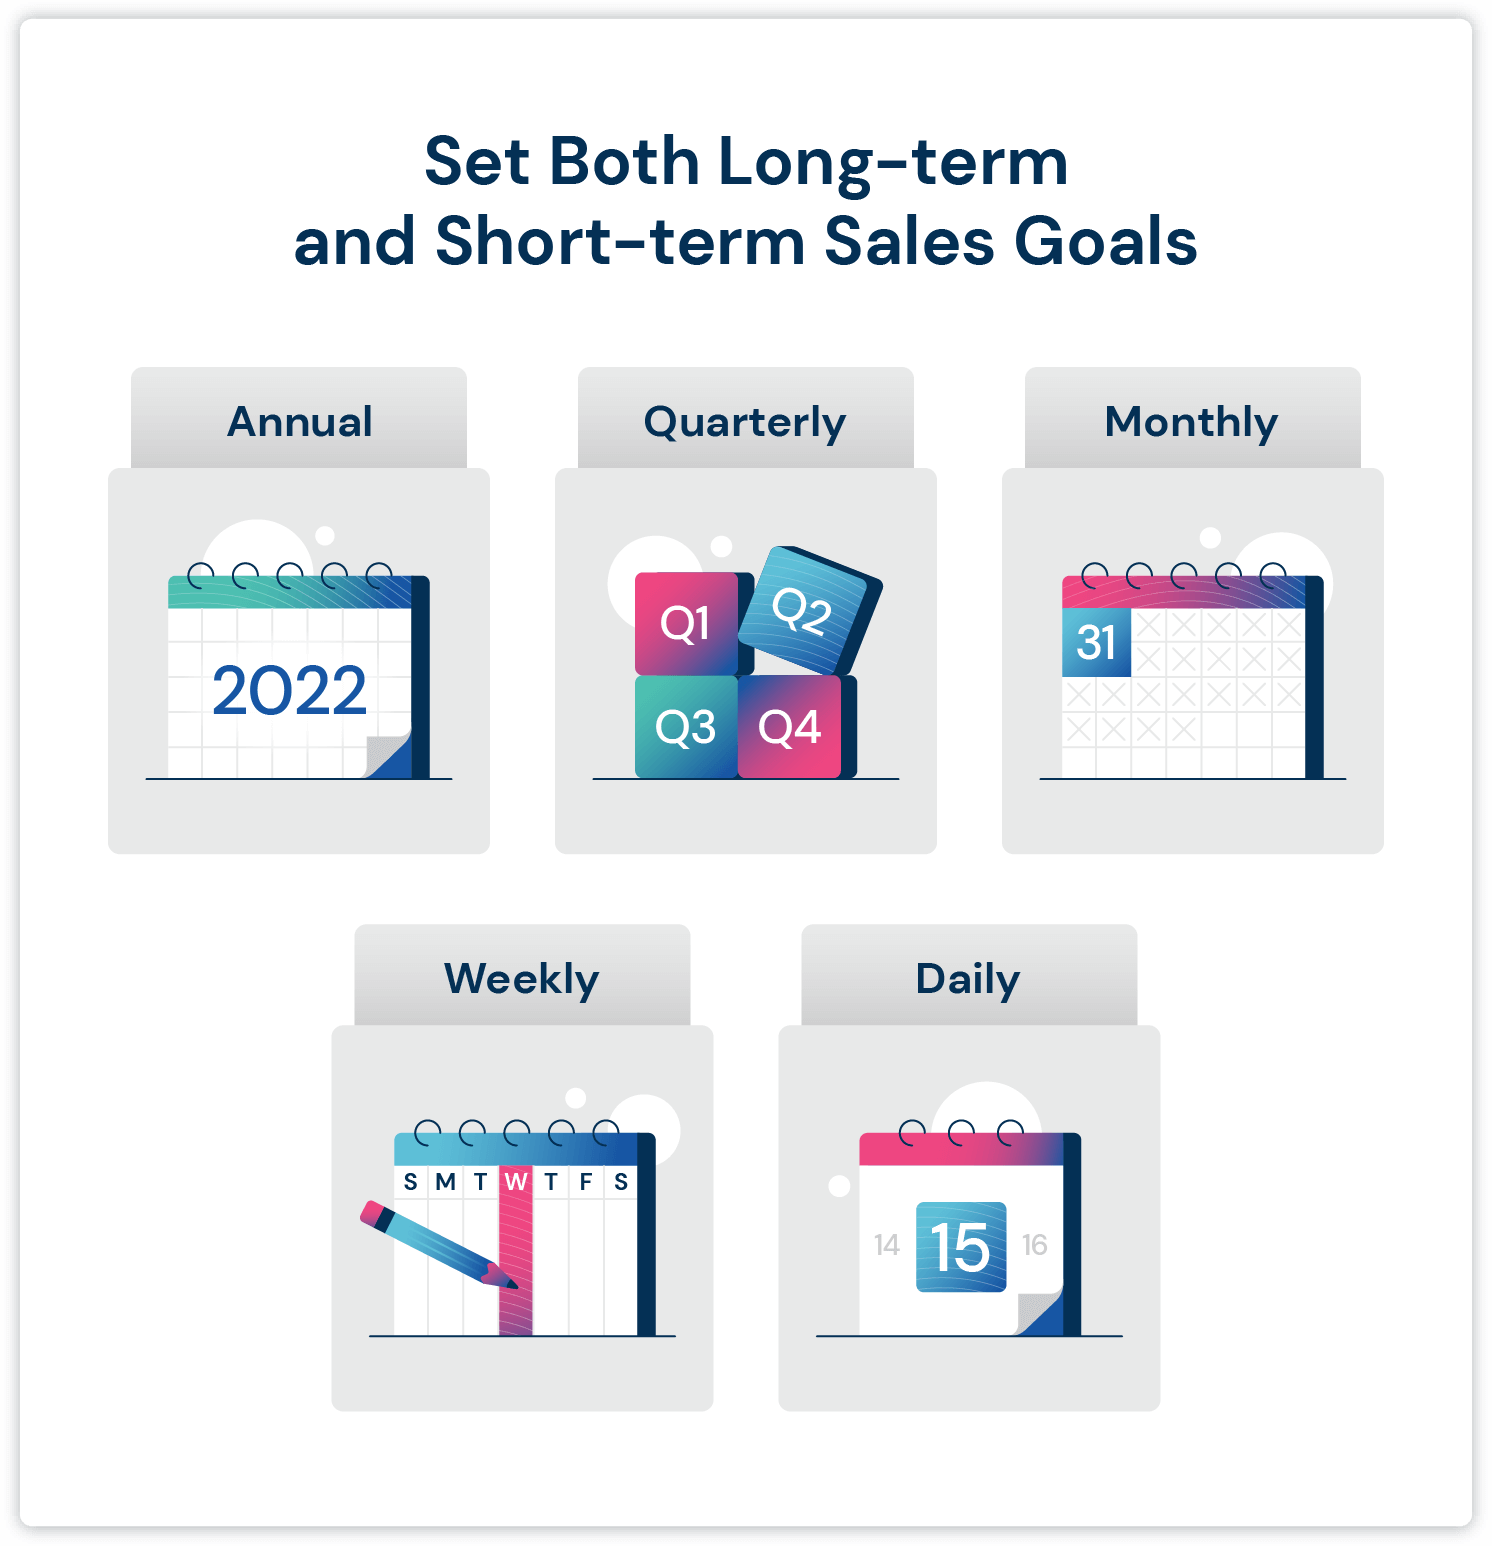 Graphic about setting long-term and short-term sales goals. Various images of calendars and time periods detailing annual, quarterly, monthly, weekly, and daily sales goals. 